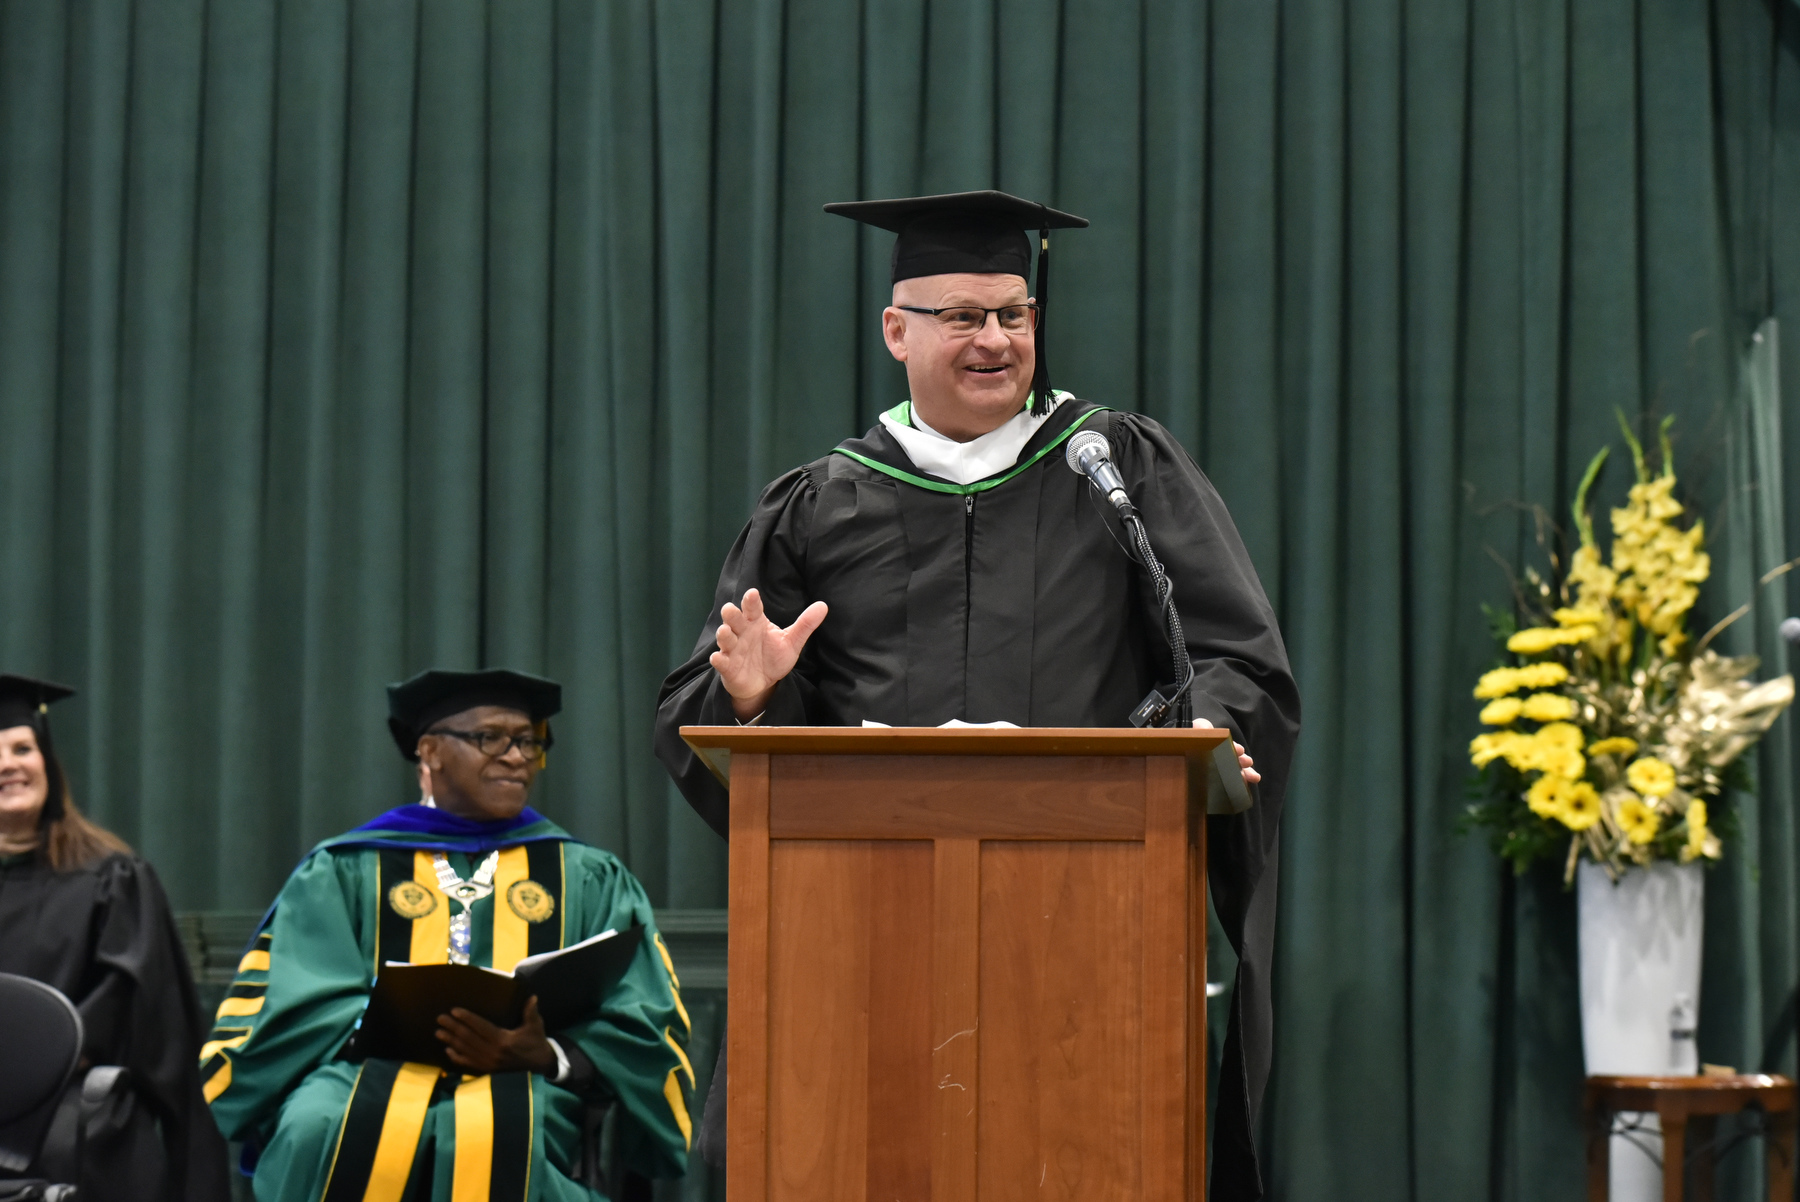 Ed Alberts, a serial entrepreneur with two master’s degrees from SUNY Oswego, served as Commencement speaker for the 12:30 p.m. School of Business ceremony.